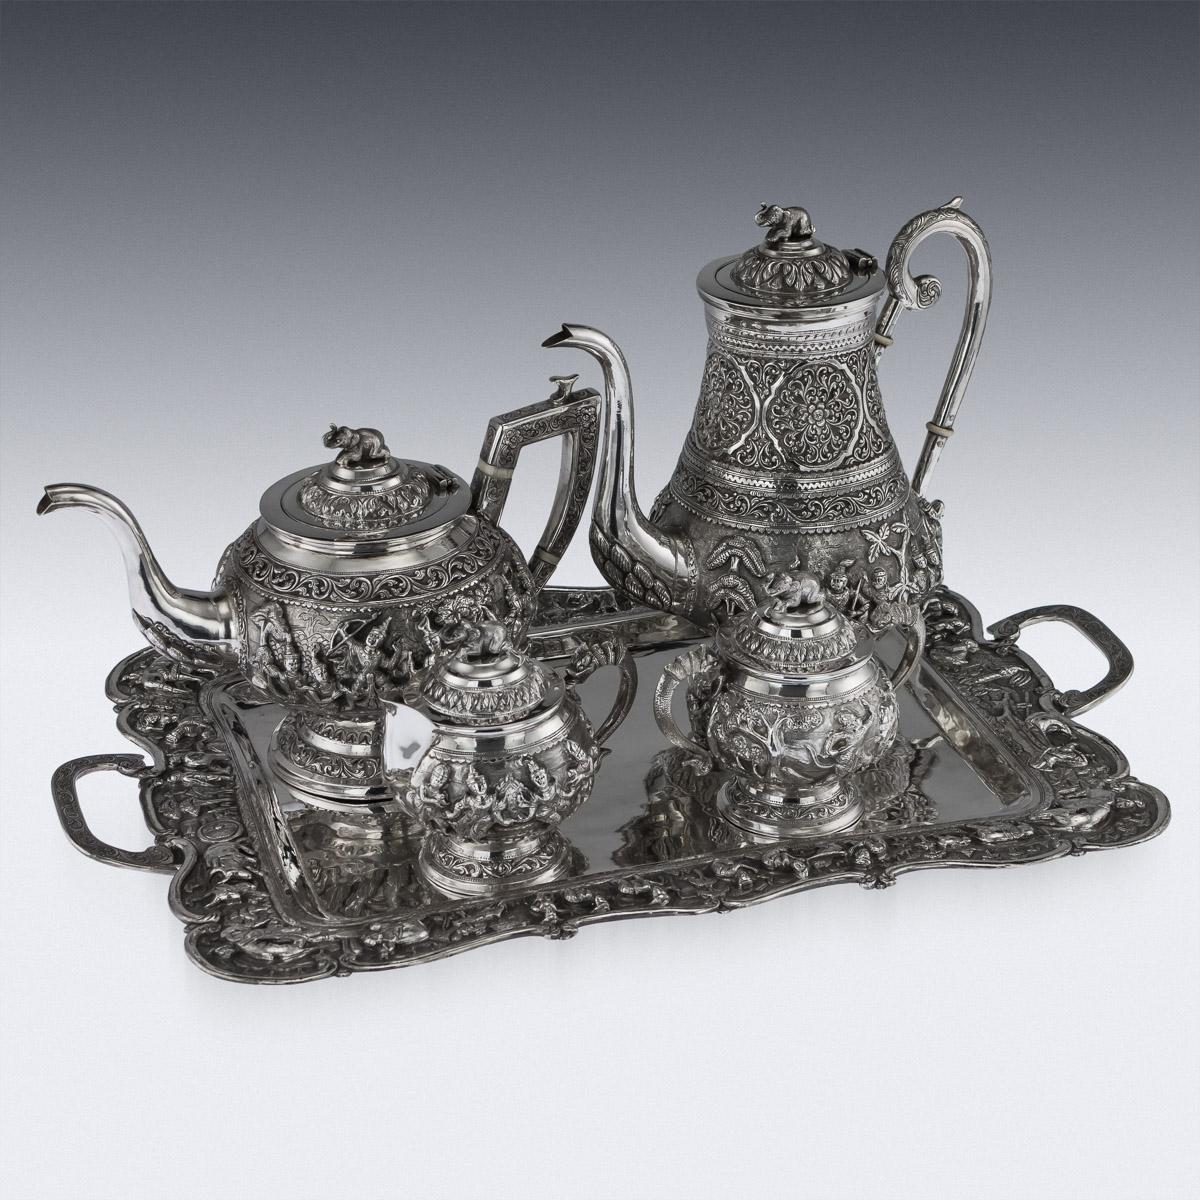 Antique early-20th century Burmese colonial solid silver four piece tea and coffee set on a tray, comprising of teapot, coffee pot, lidded sugar bowl, and lidded cream jug and a tray, each piece is highly-decorative, chased and repoussed with